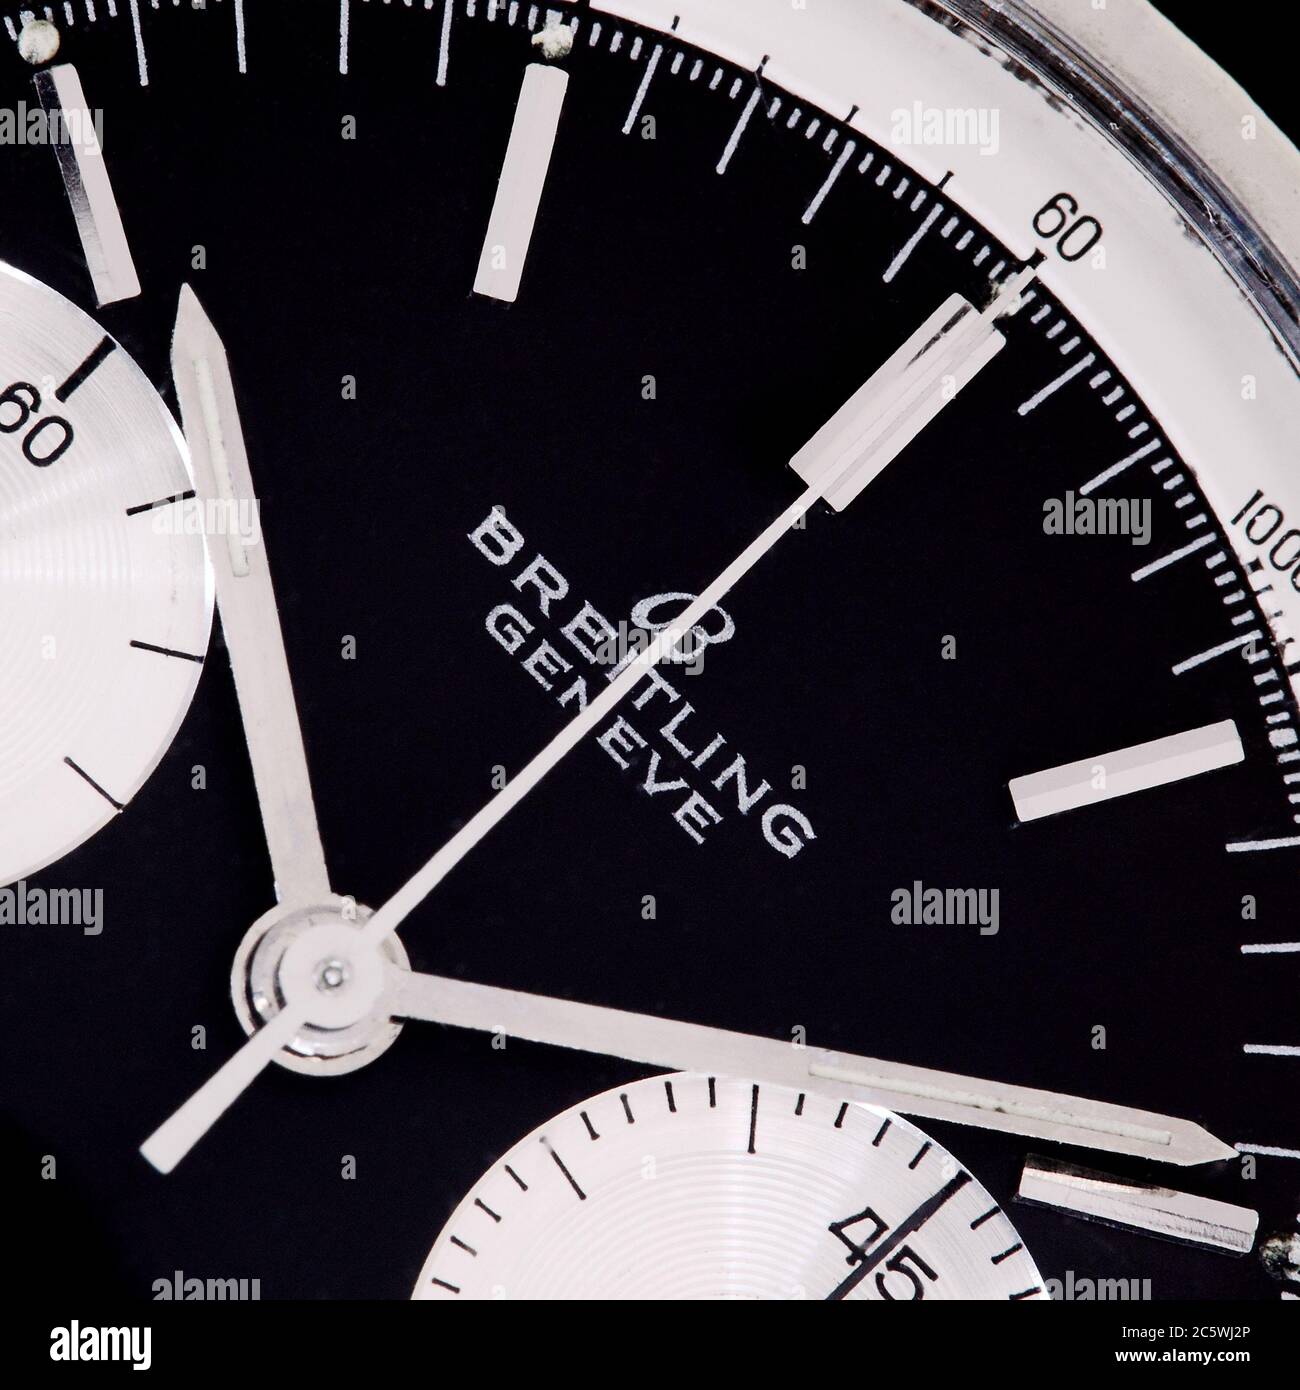 Breitling logo. Breitling Geneve watch company logos on a 1960 vintage chronograph wristwatch. Breitling Top Time. Used in 1965 Bond film Stock Photo